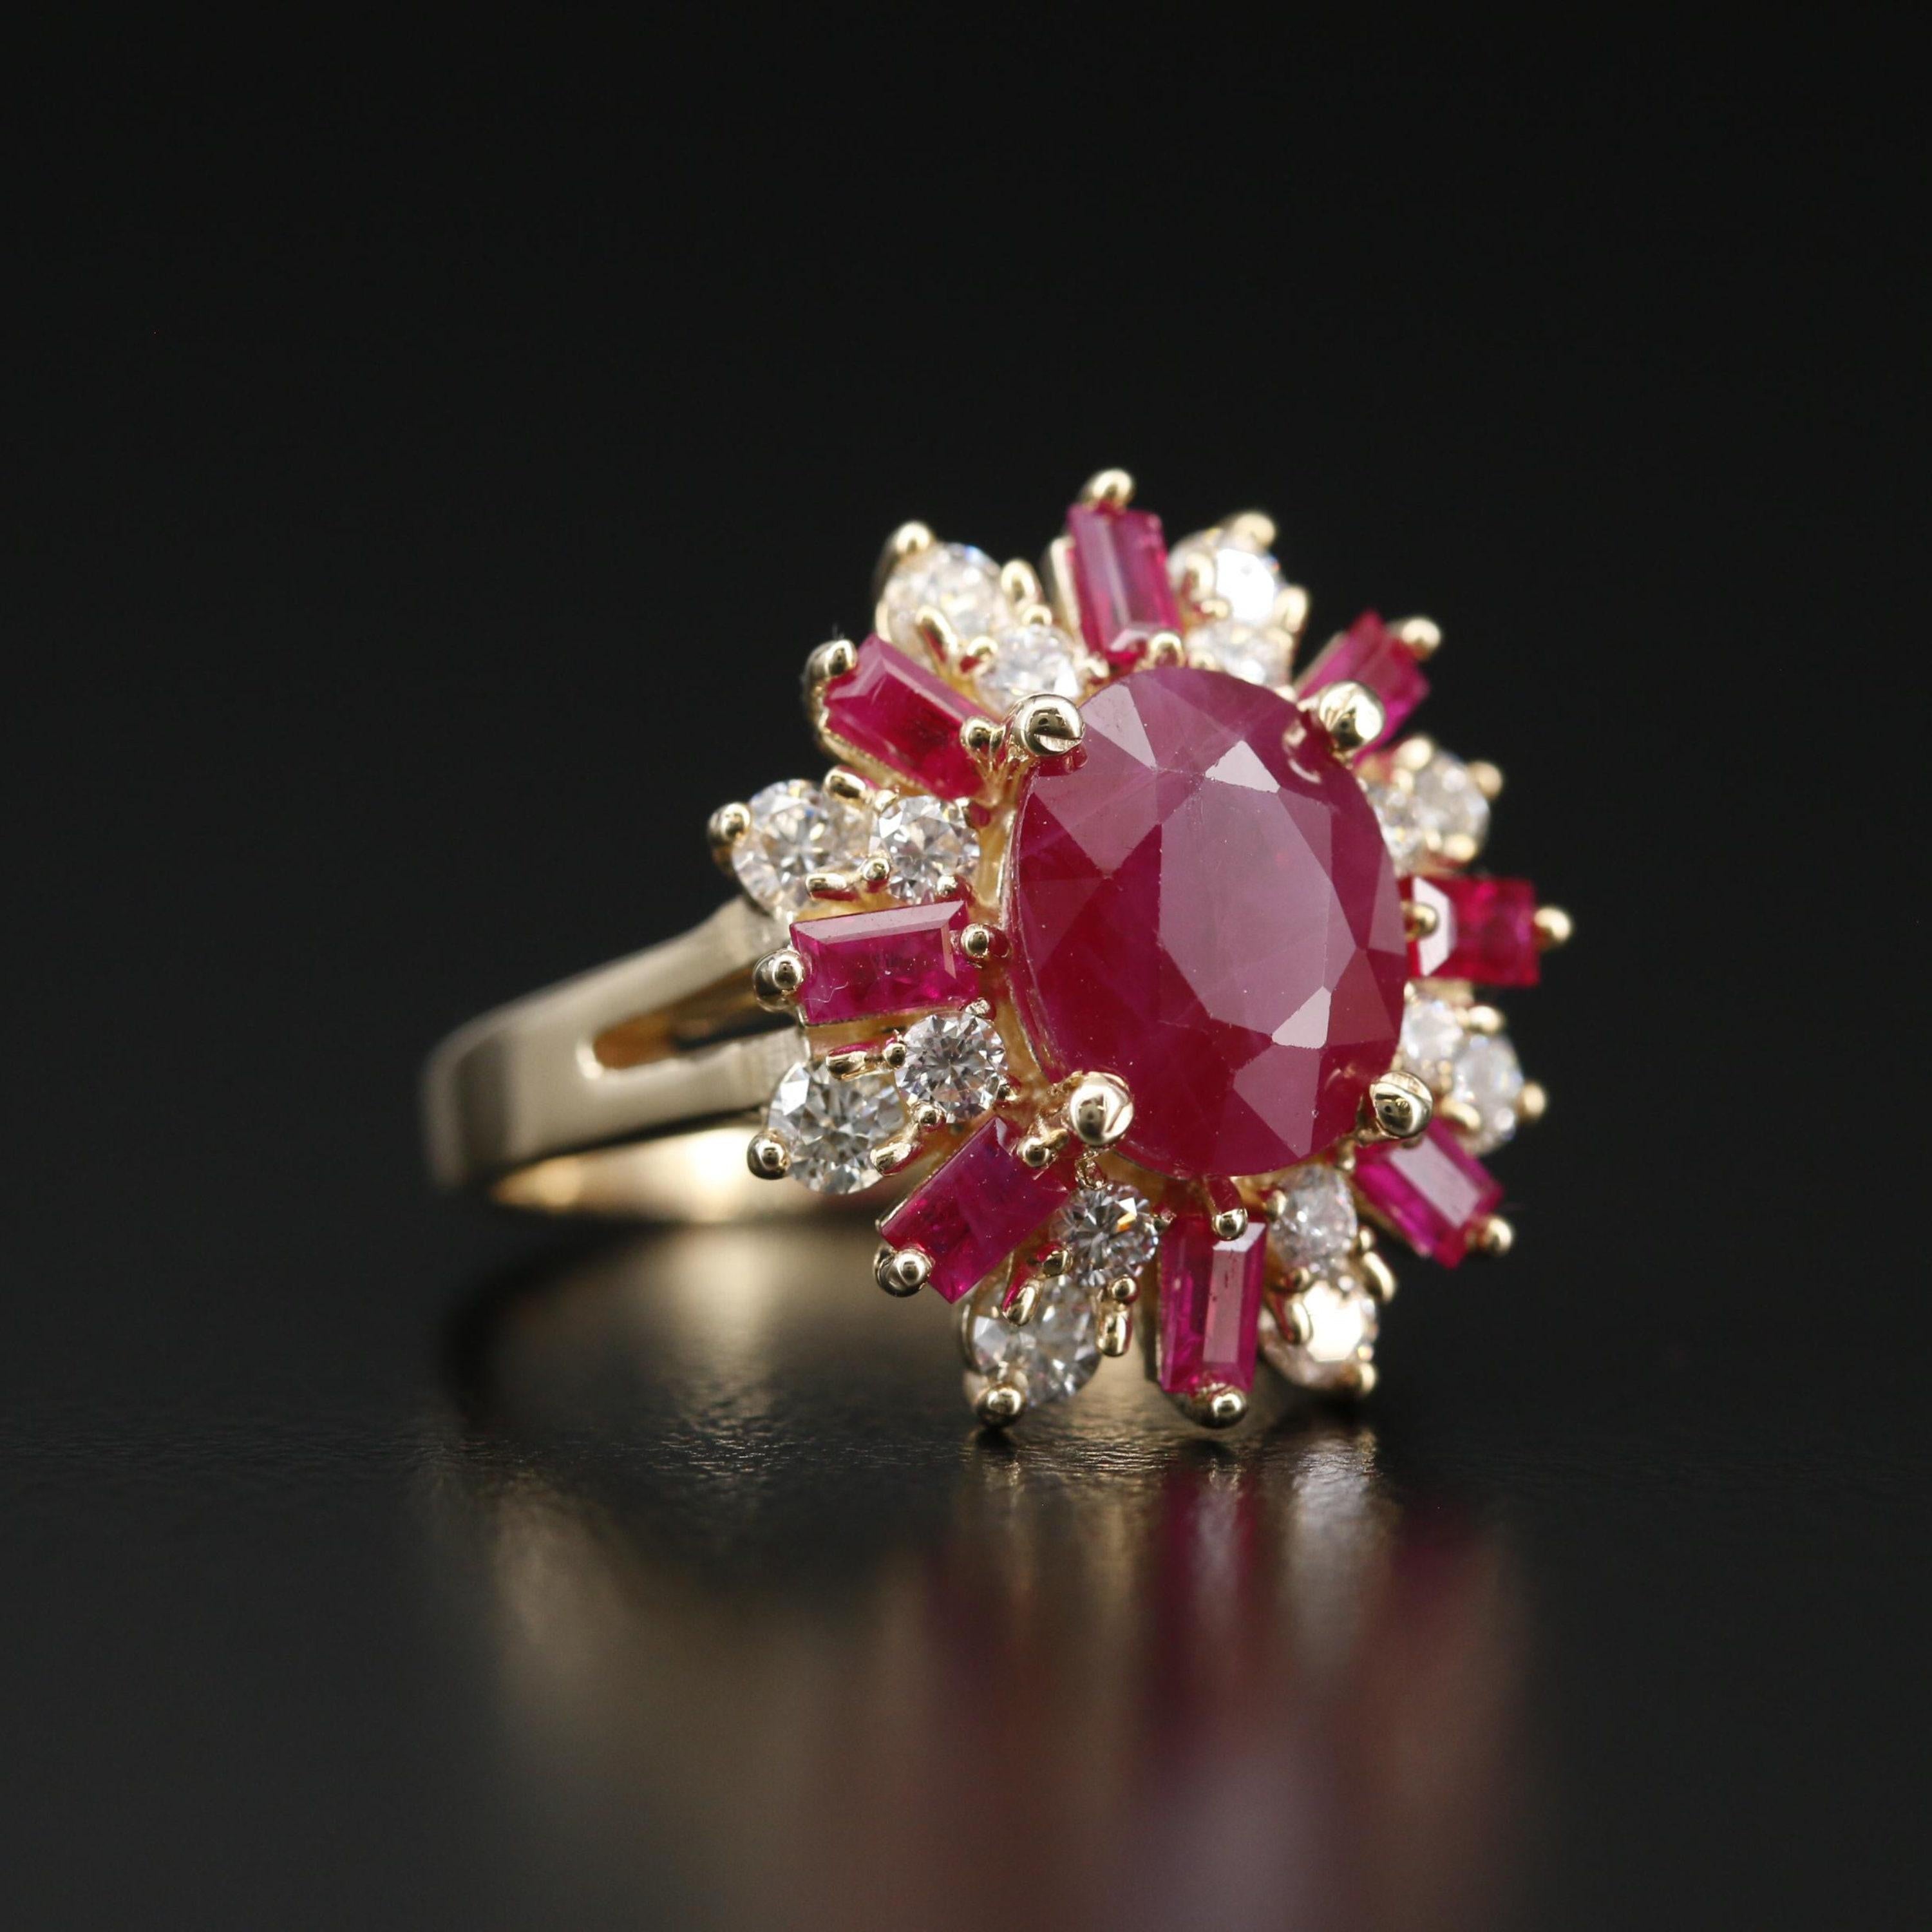 For Sale:  3 Carat Floral Ruby Diamond Engagement Ring Art Deco Victorian Ruby Wedding Ring 4